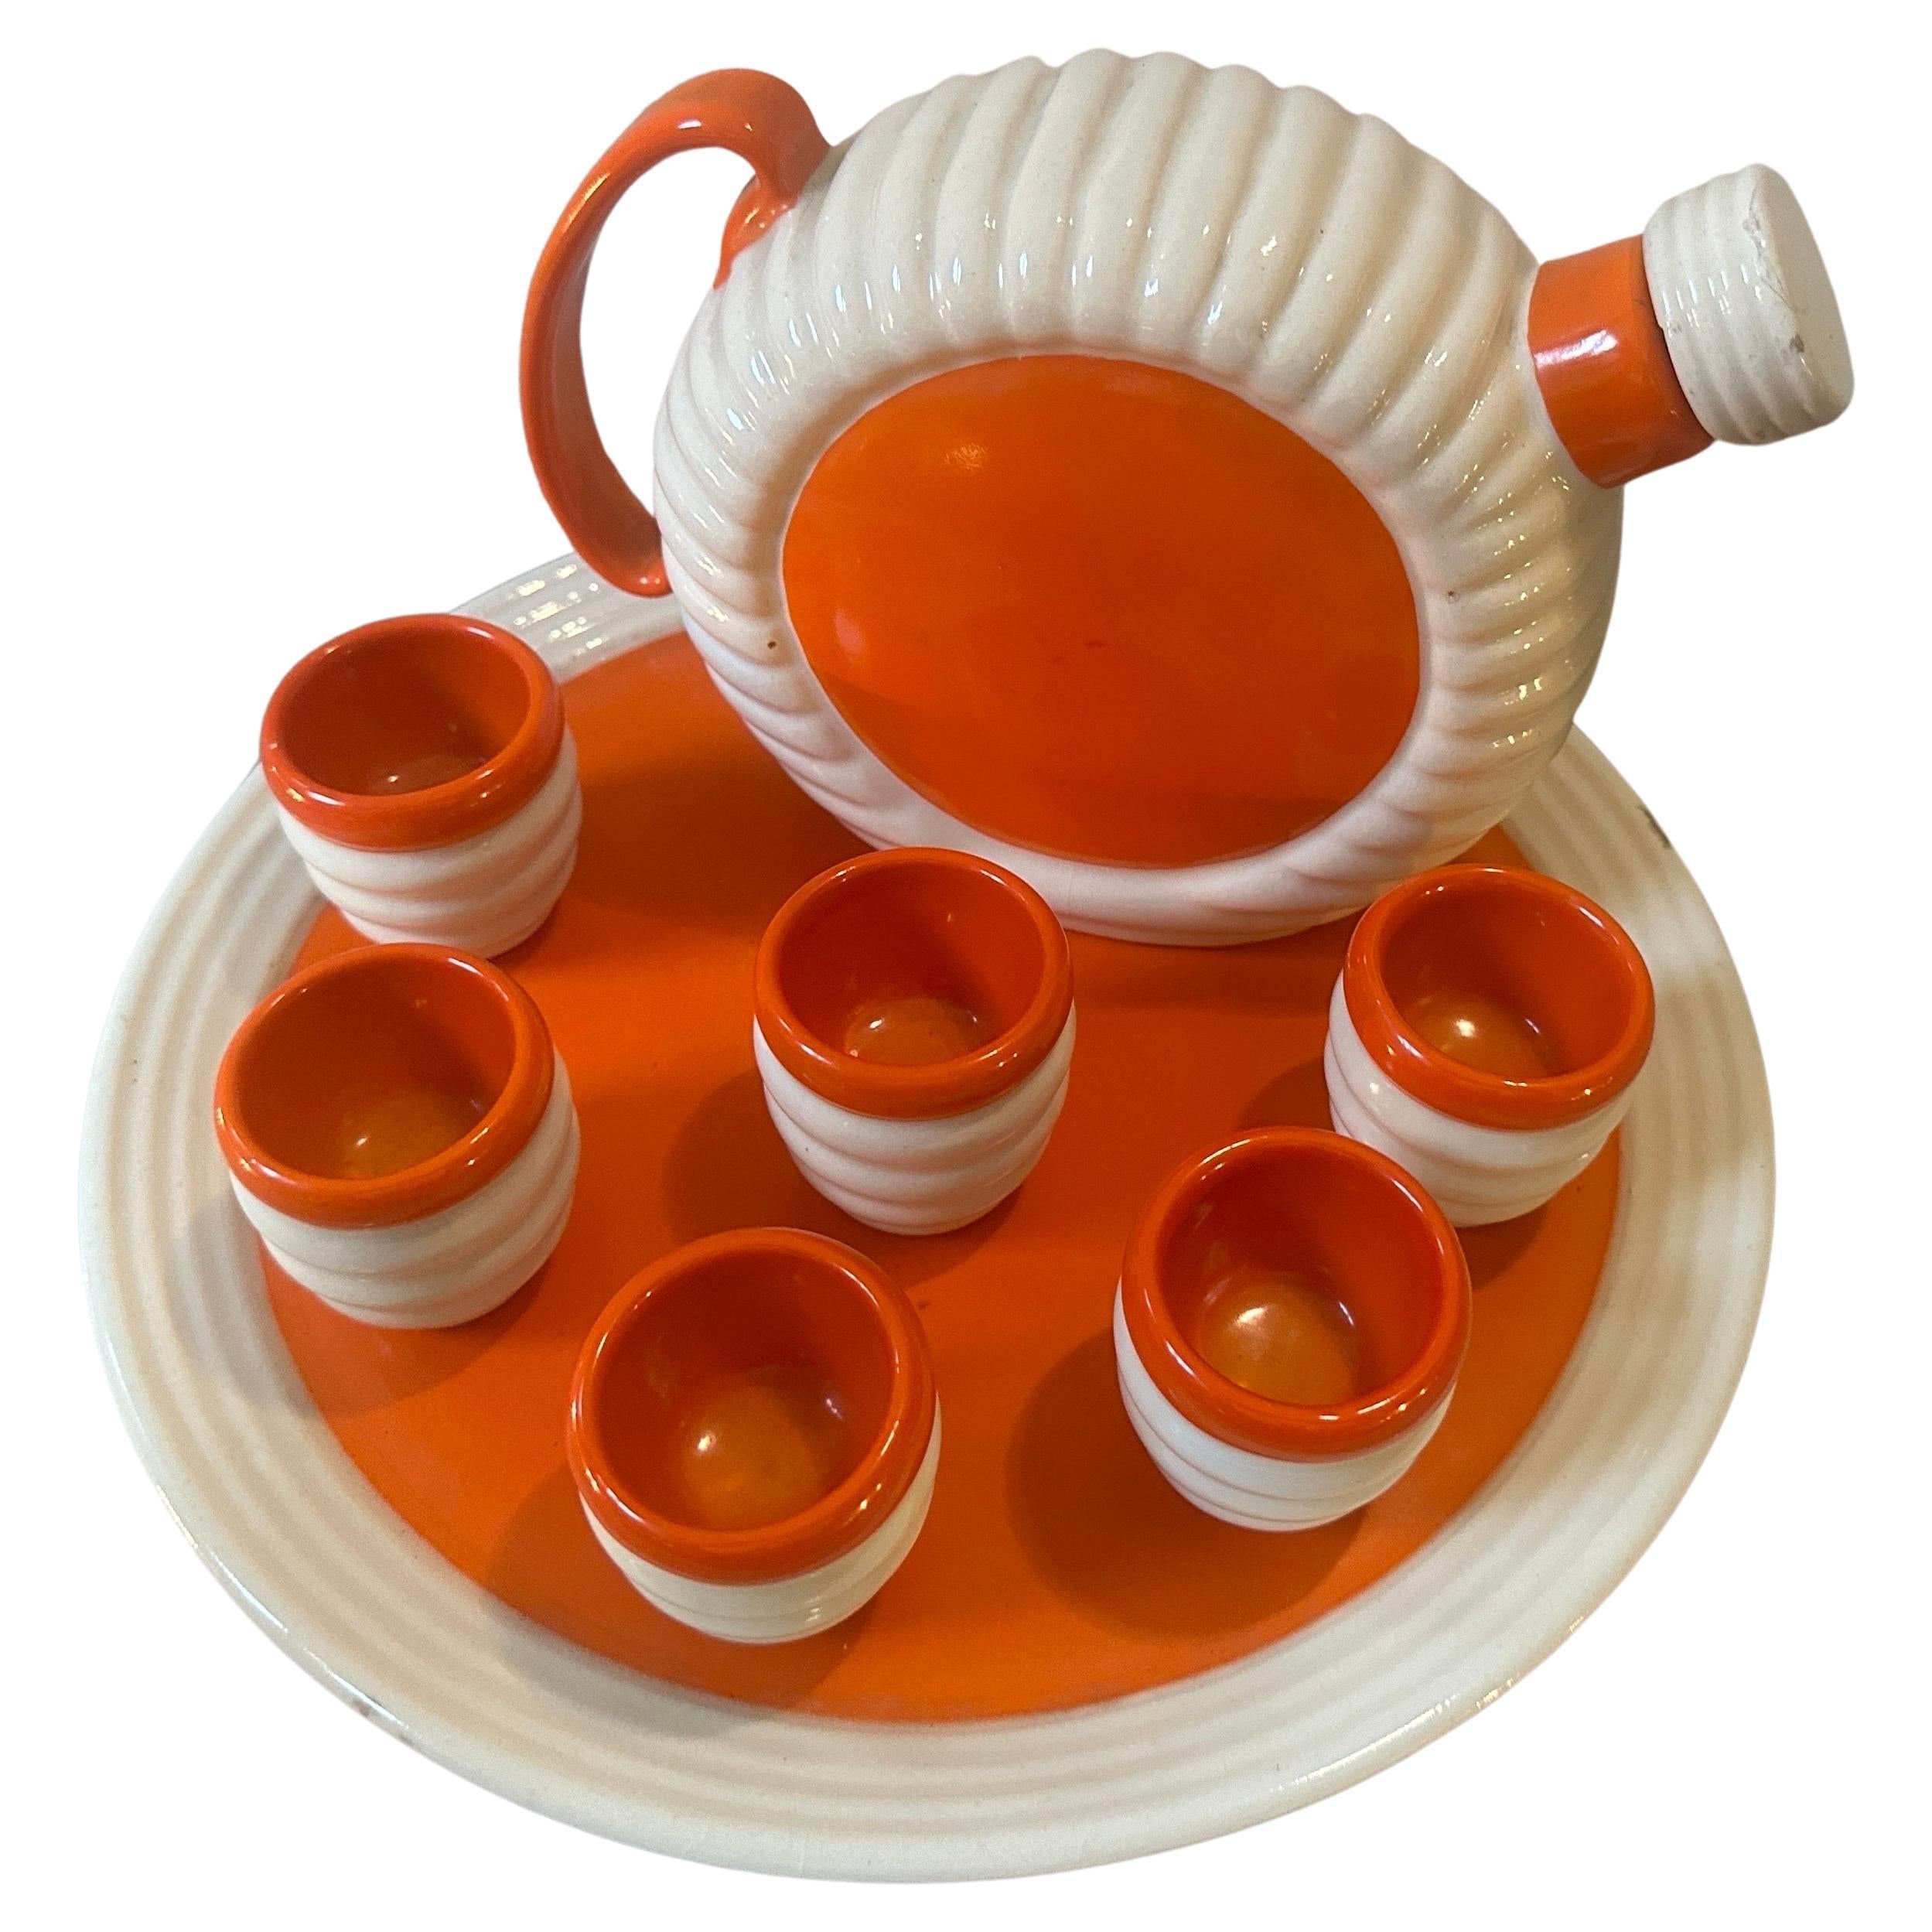 A ceramic liquor set designed and manufactured in the Thirties by Rometti Umbertide, it'is in good conditions overall with normal signs of use and age, it's signed on the bottom Rometti Ceramiche Umbertide.
This rosolio set showcases the distinctive